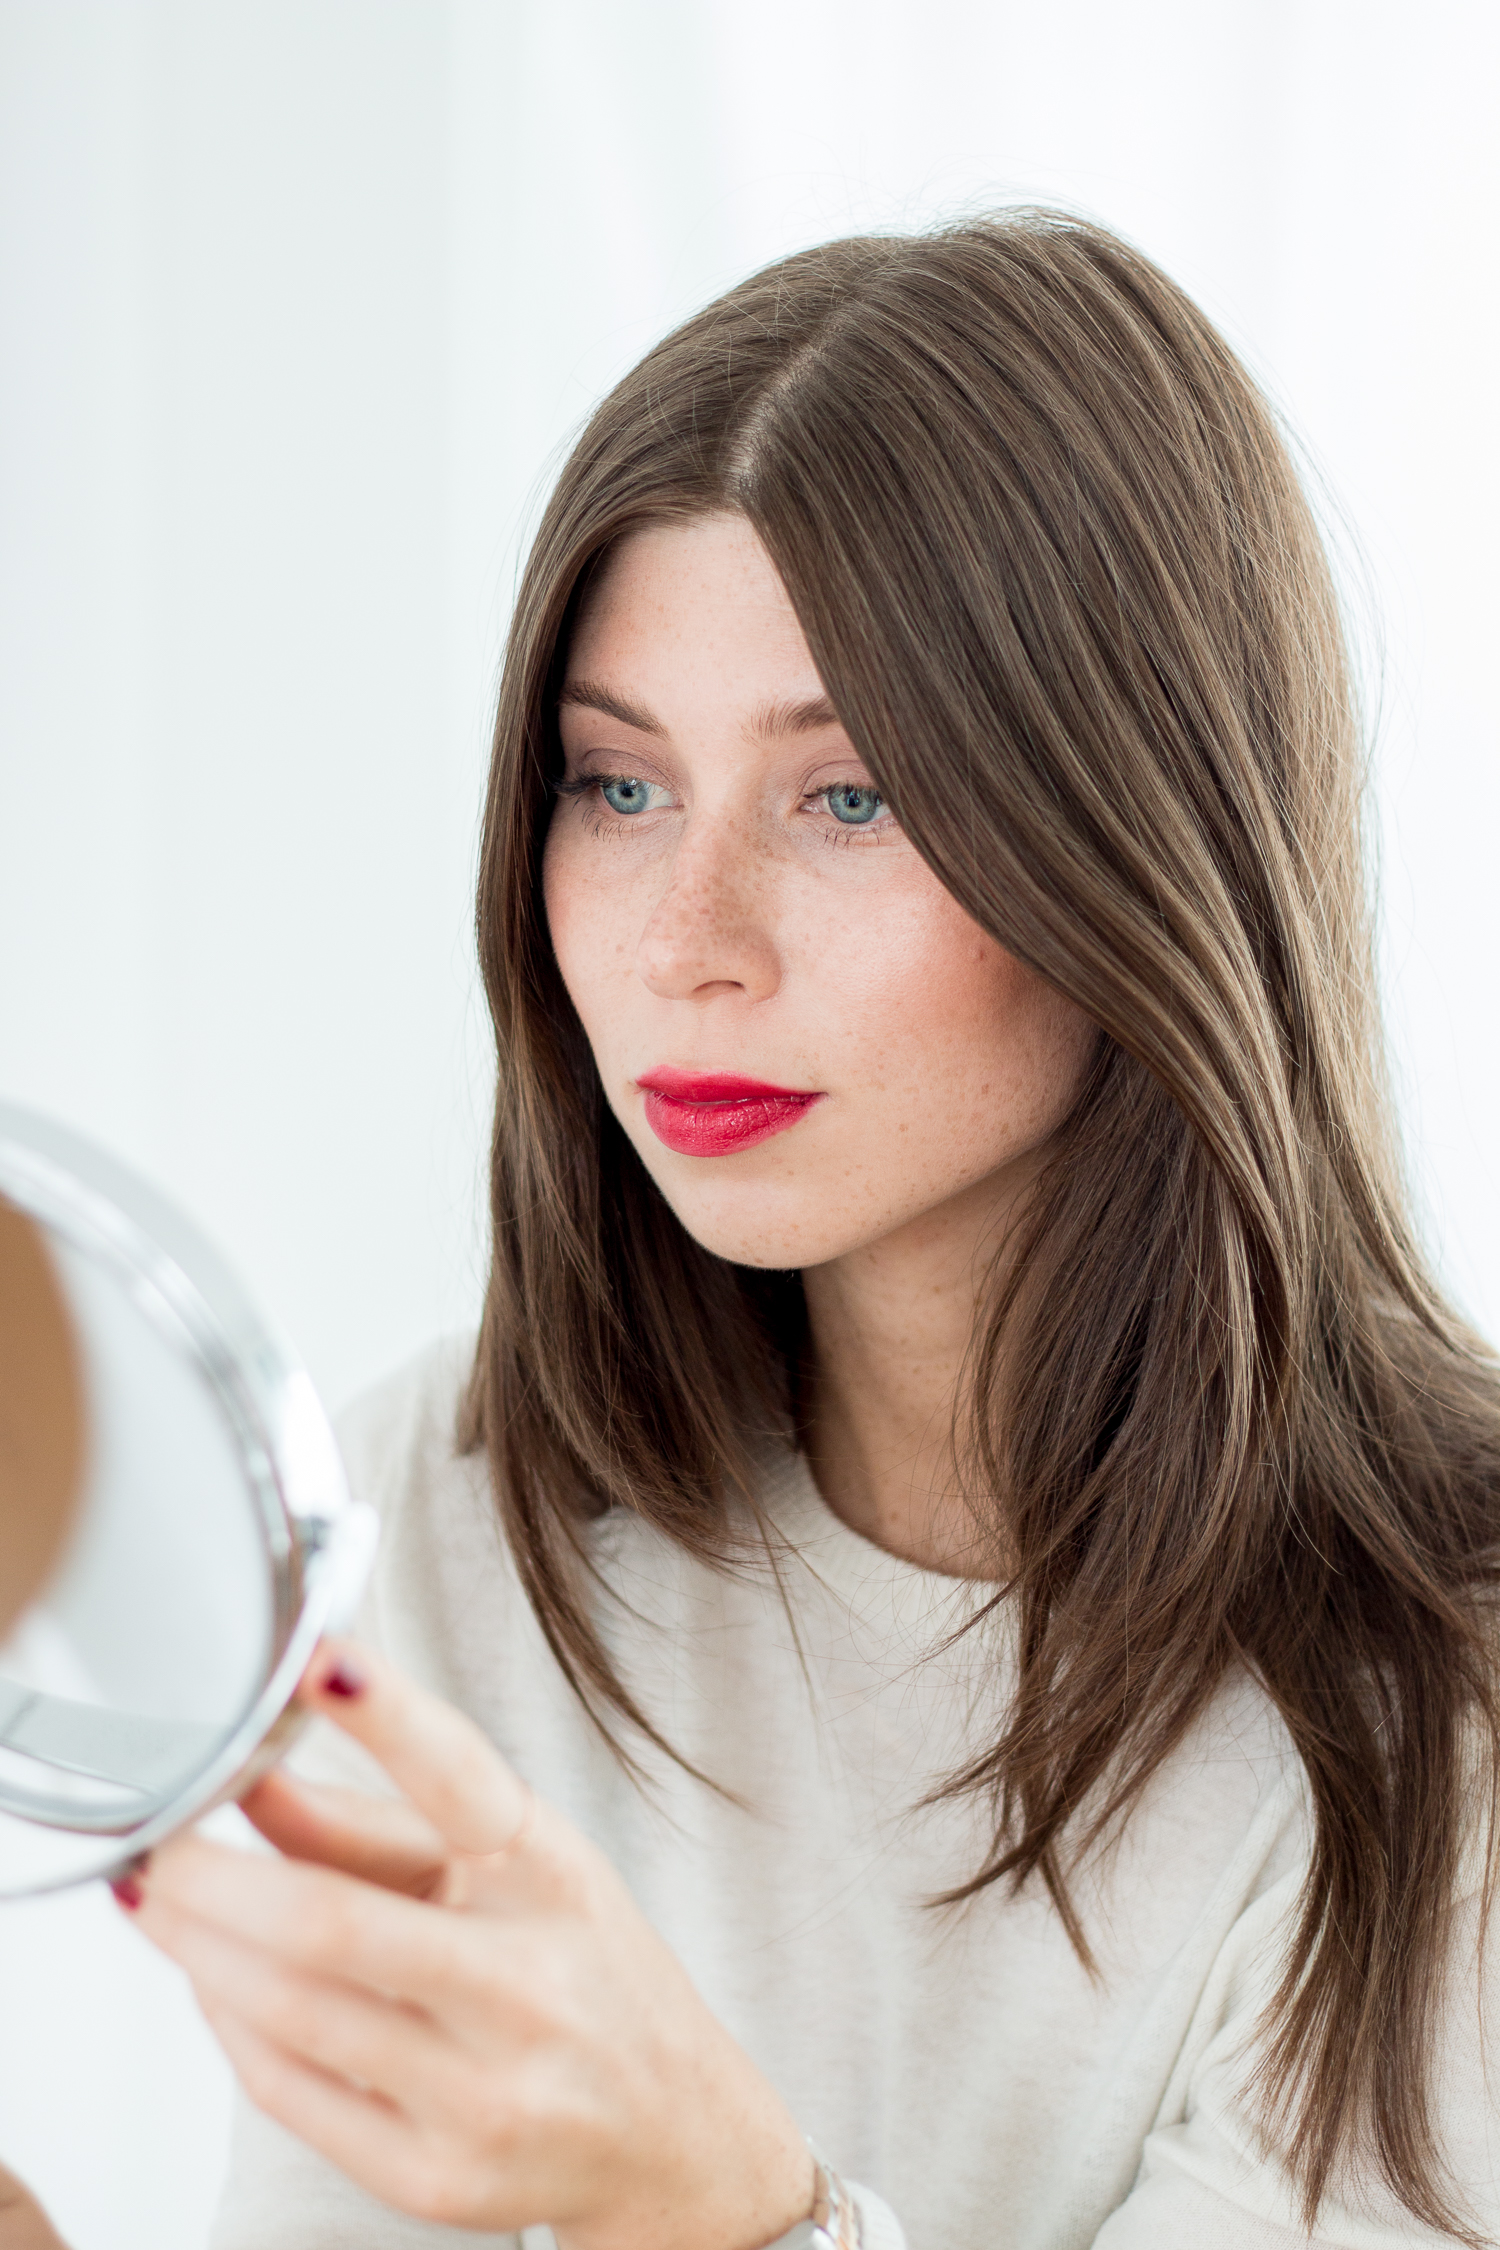 L'Oreal Paris Make-Up Tutoria: French Chic | Love Daily Dose